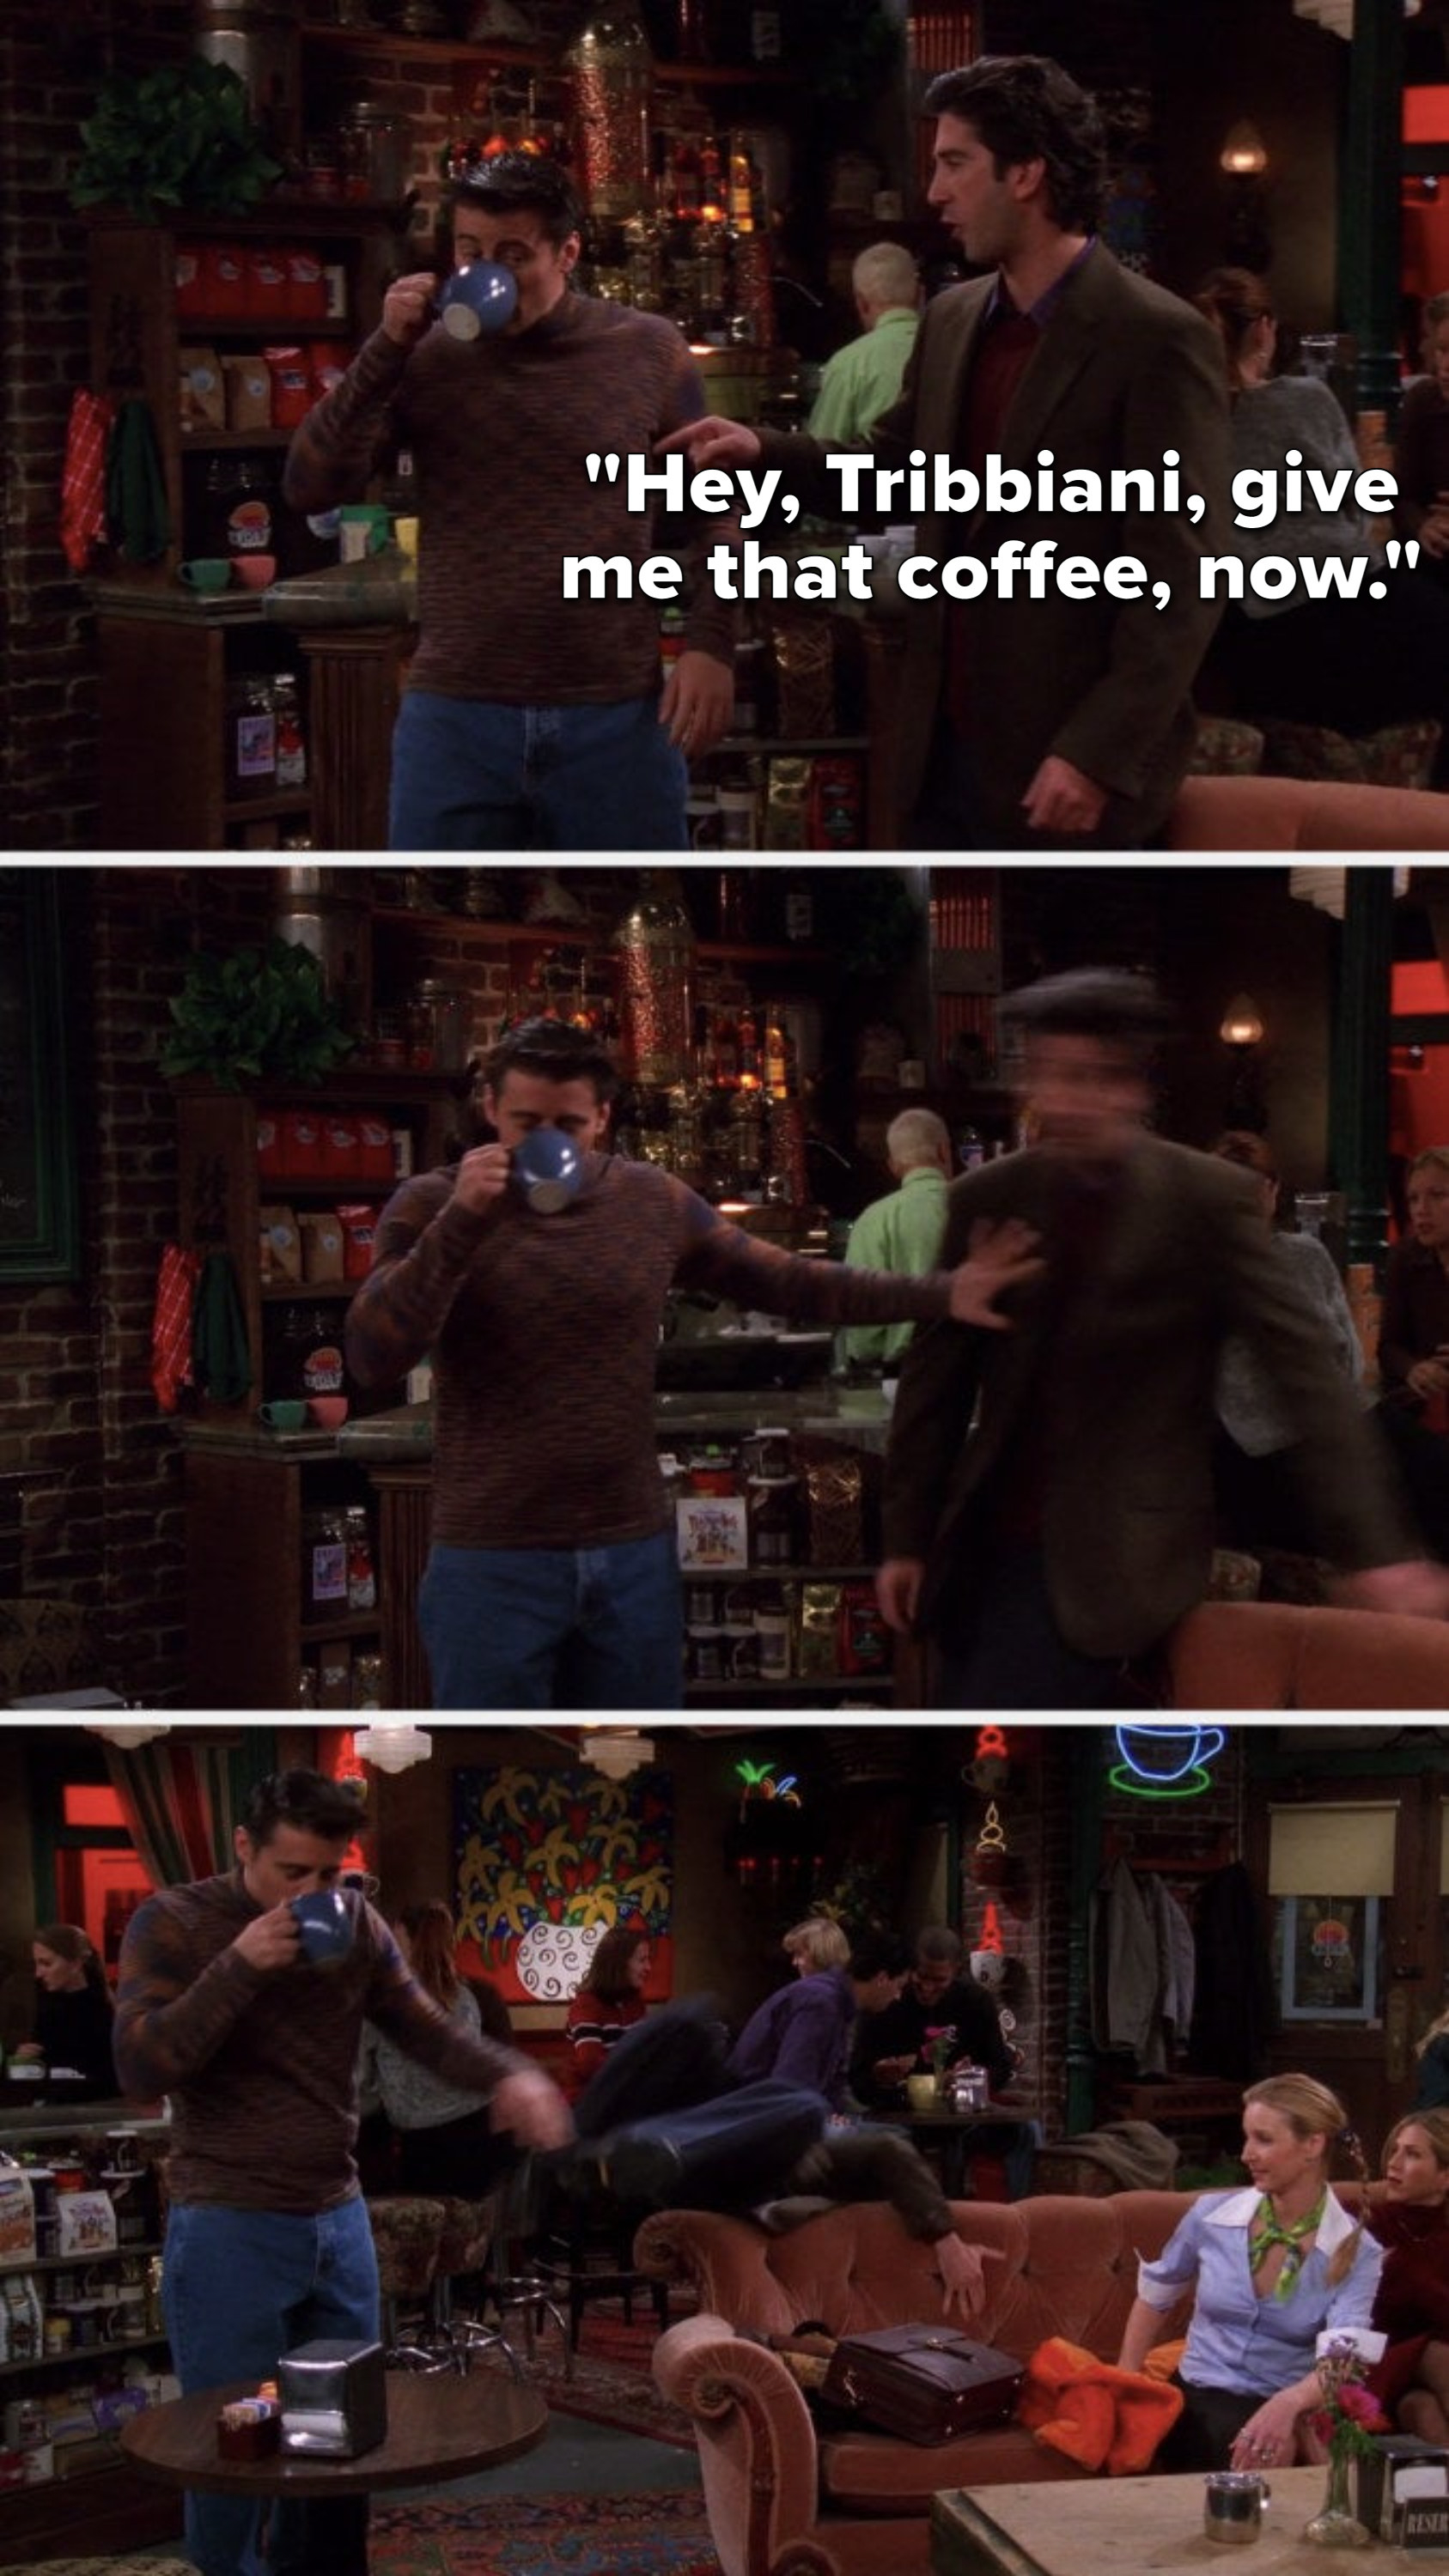 Ross says, &quot;Hey, Tribbiani, give me that coffee, now,&quot; and Joey pushes Ross so hard that he flies over the Central Perk couch